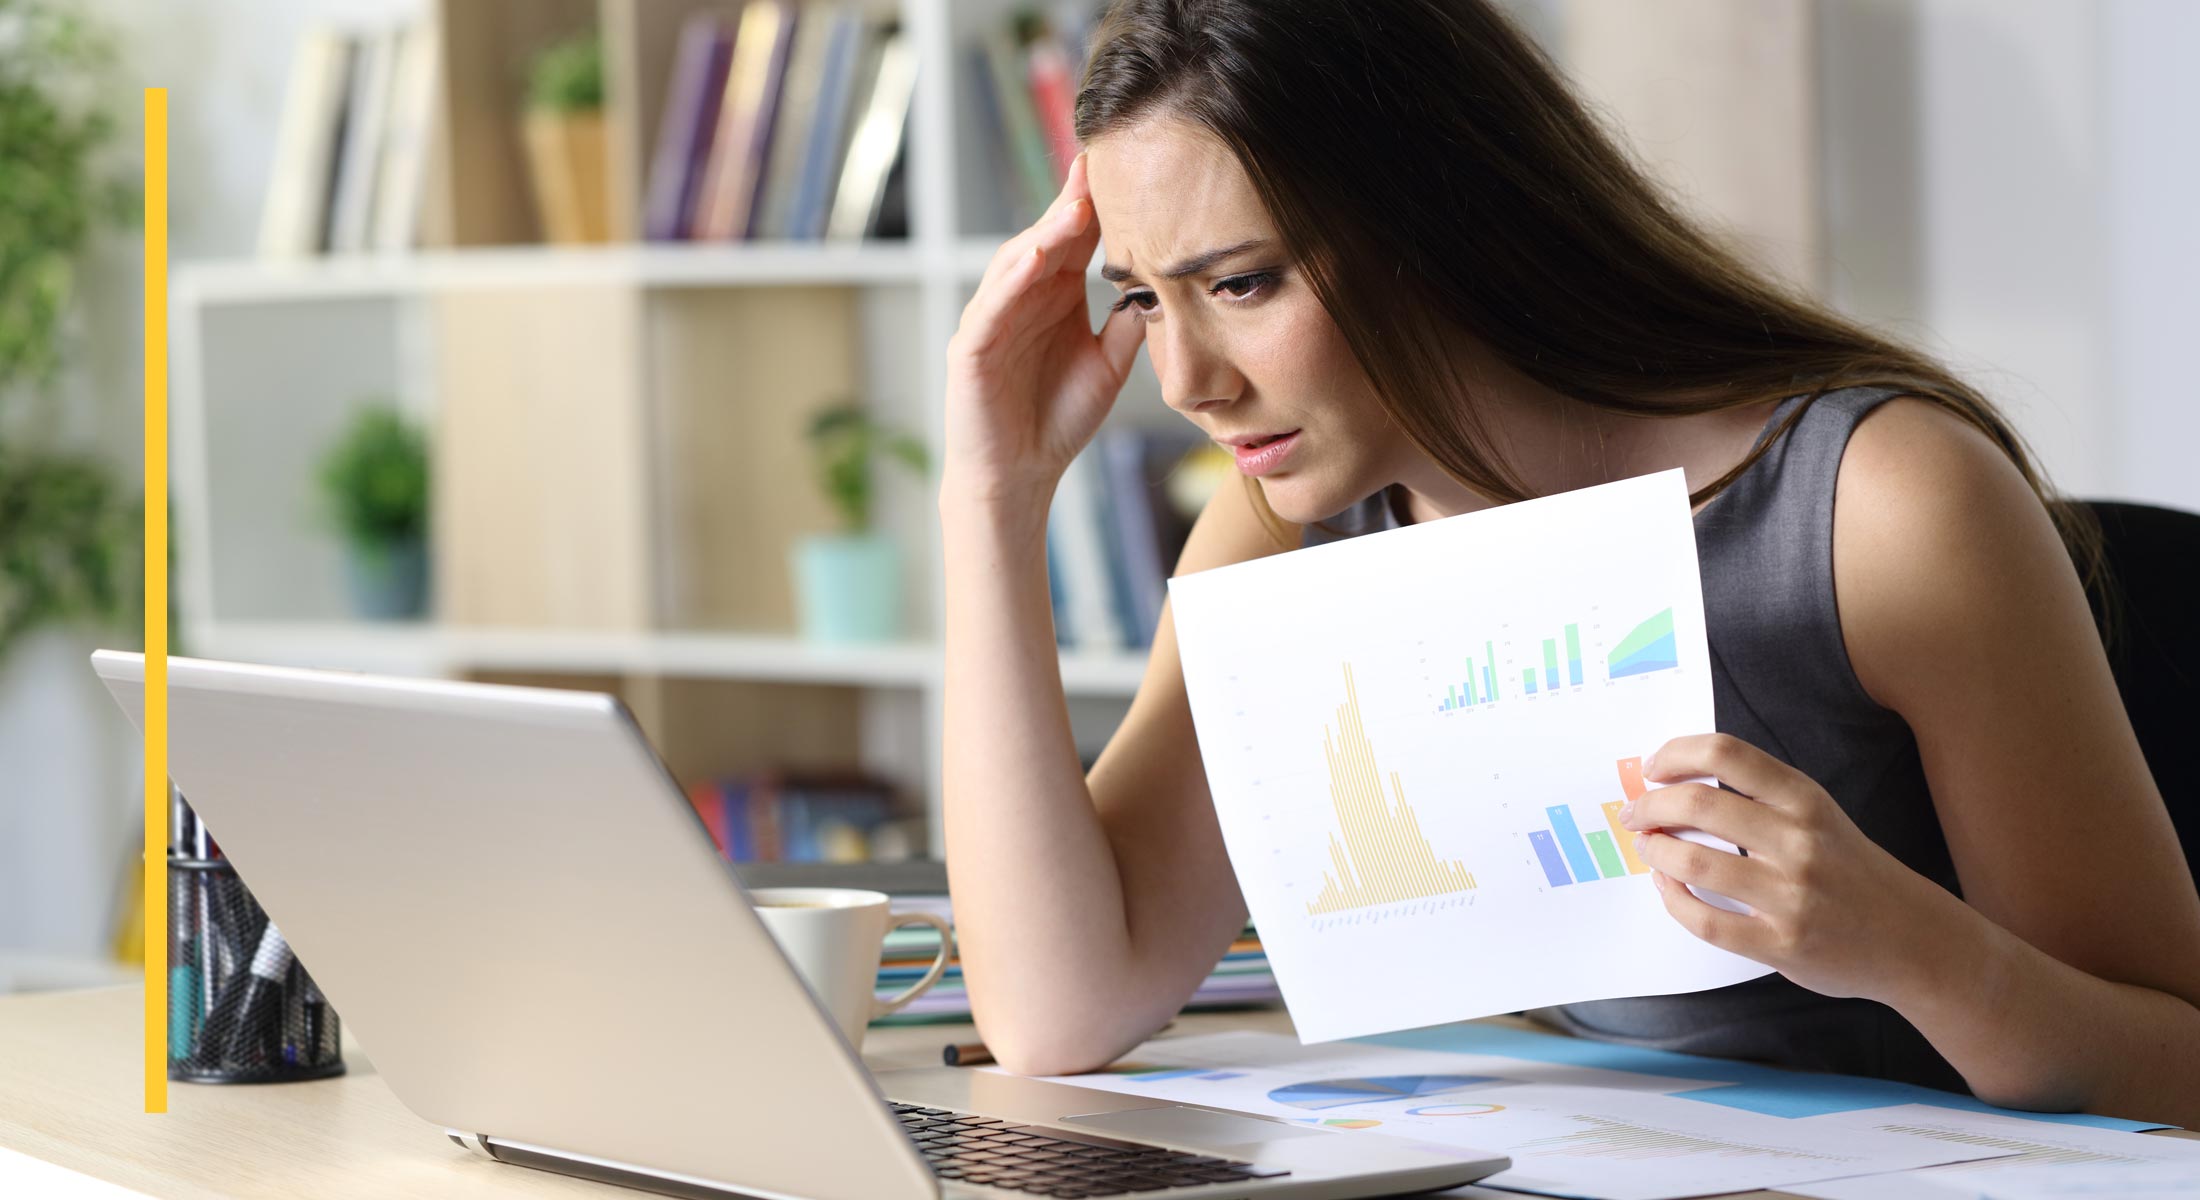 A frustrated woman holds a print-out of graphs while looking at her laptop